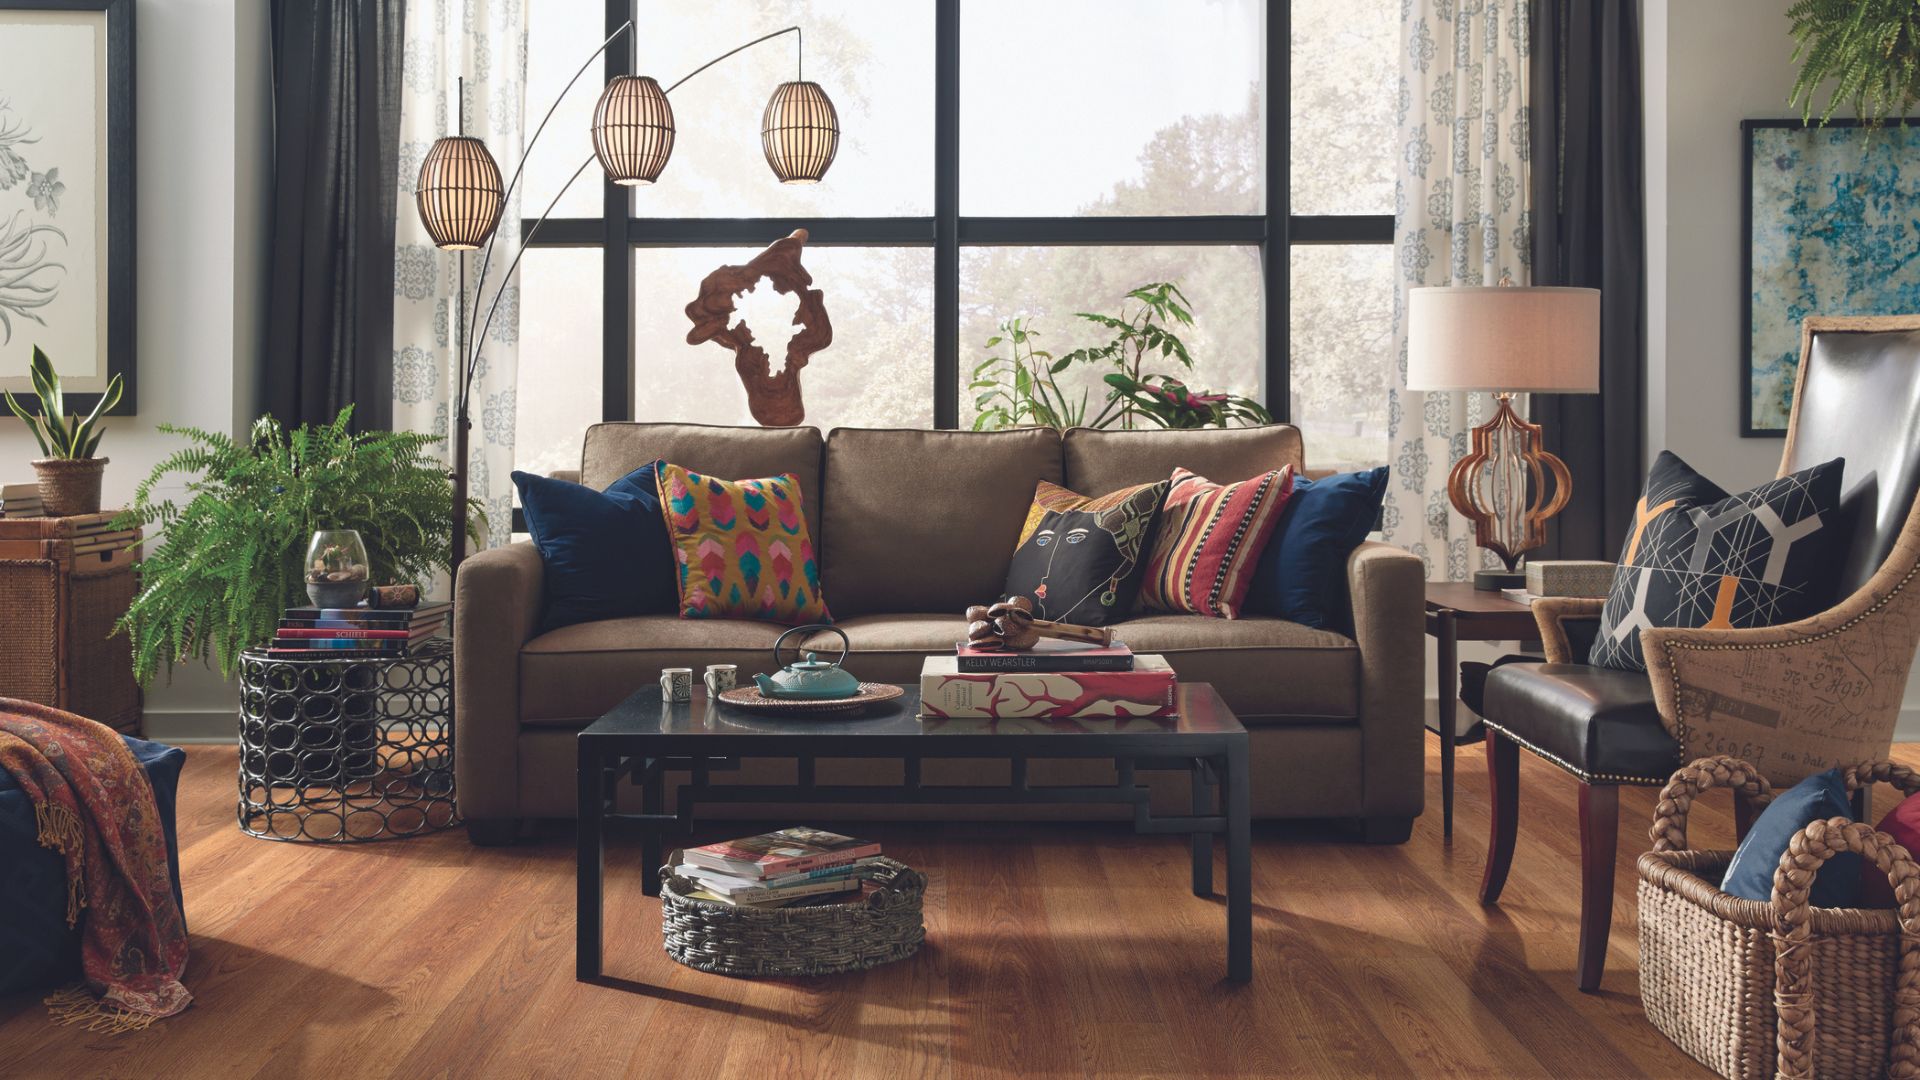 Laminate wood flooring in a bohemian-style living room.